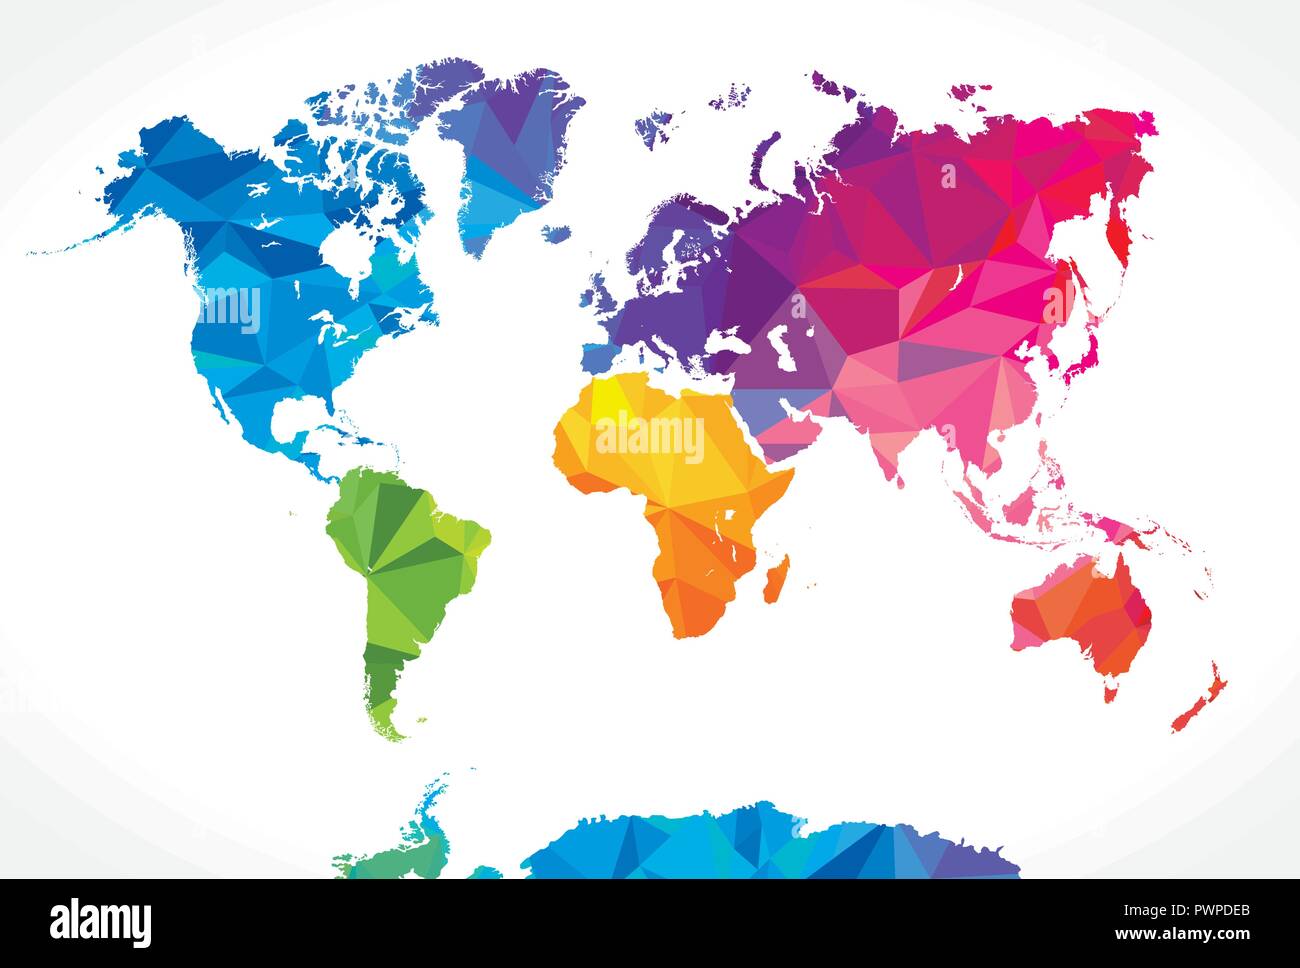 Low poly world map vector illustration for your design Stock Vector